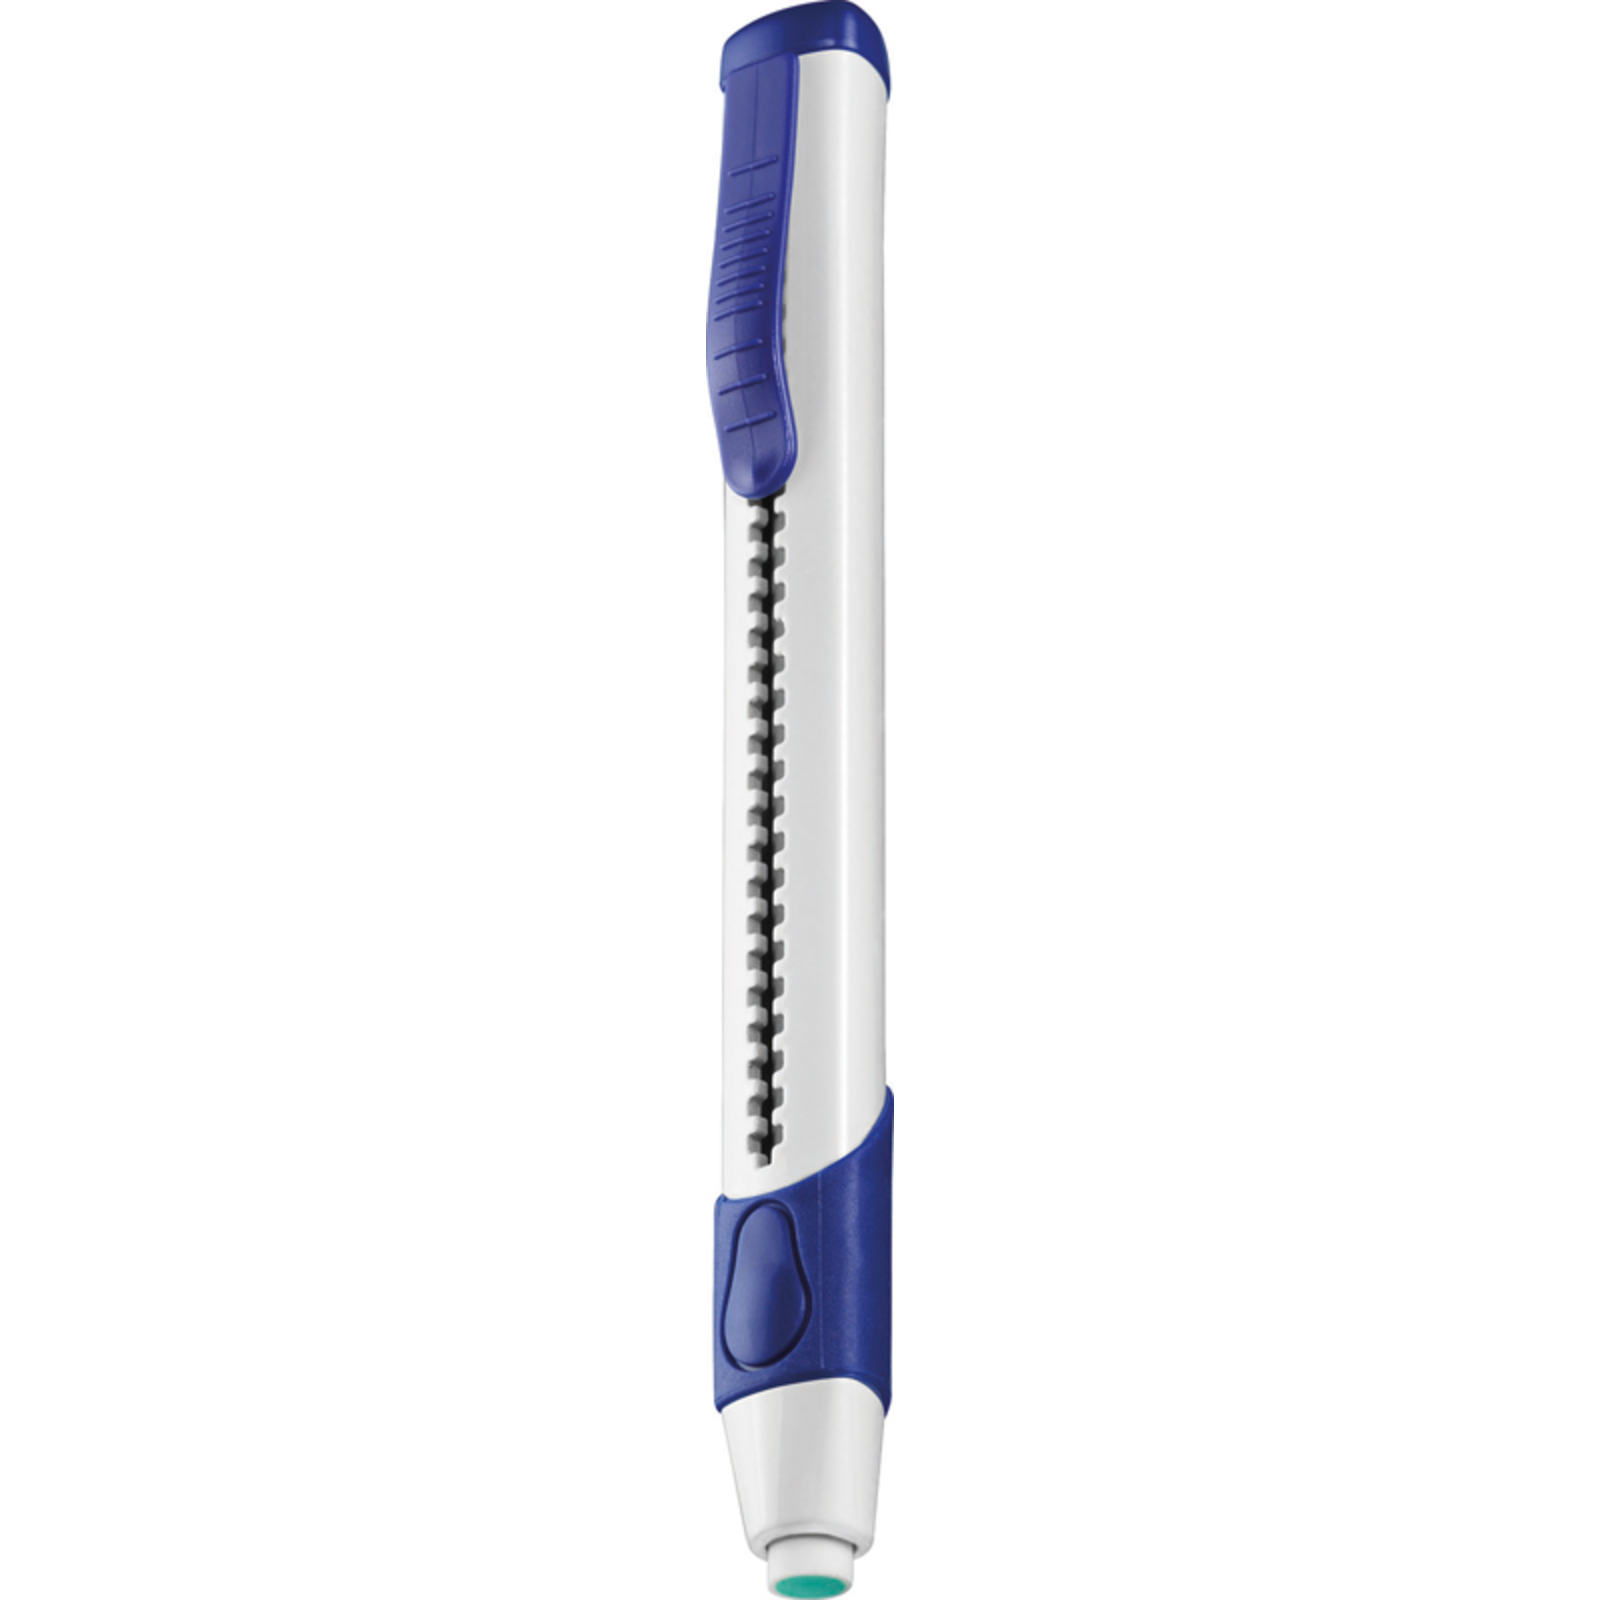 Q-CONNECT stylo gomme